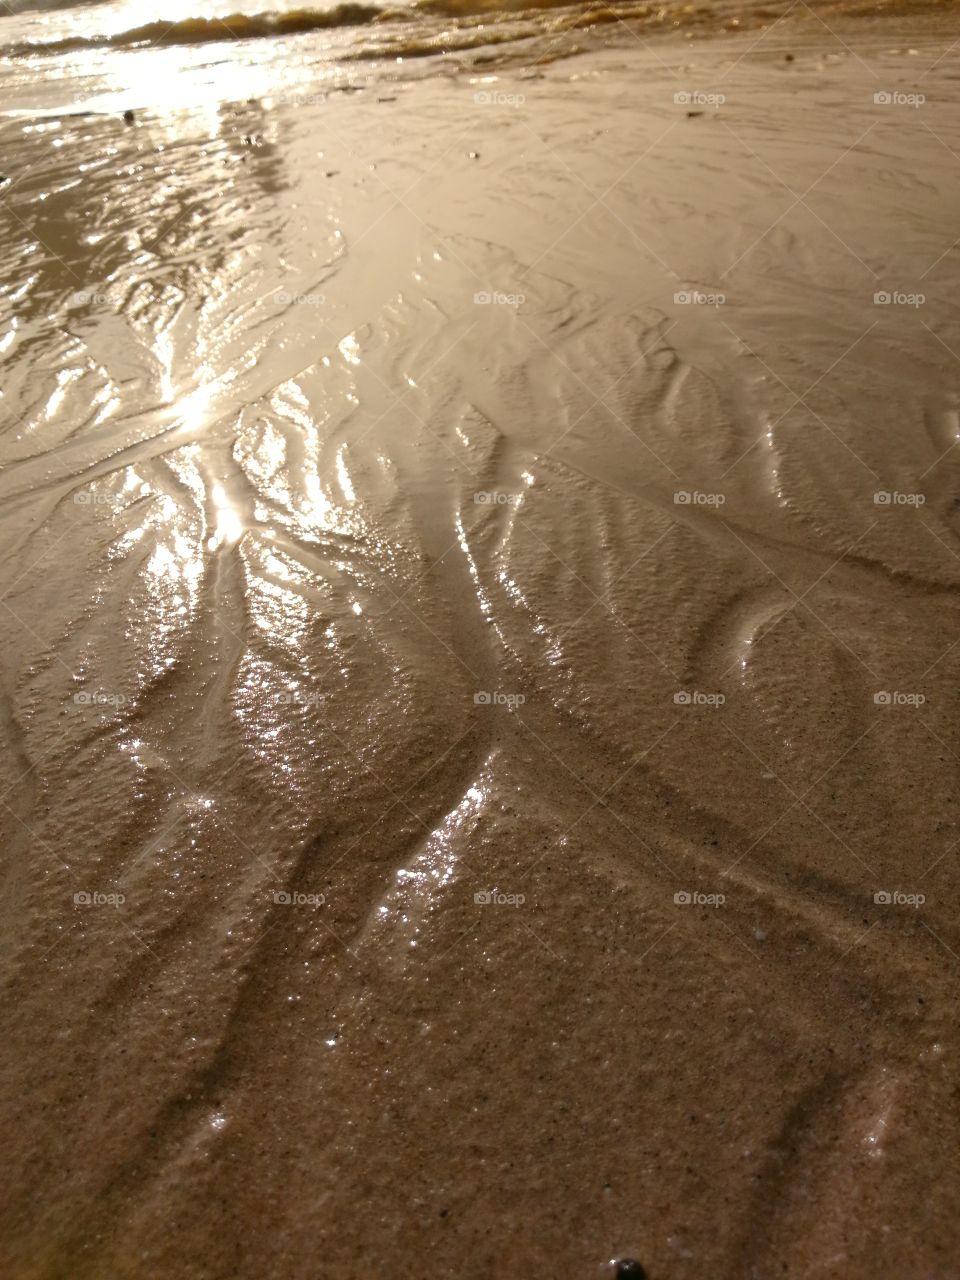 Wet sand with patterns on a beach in Thailand